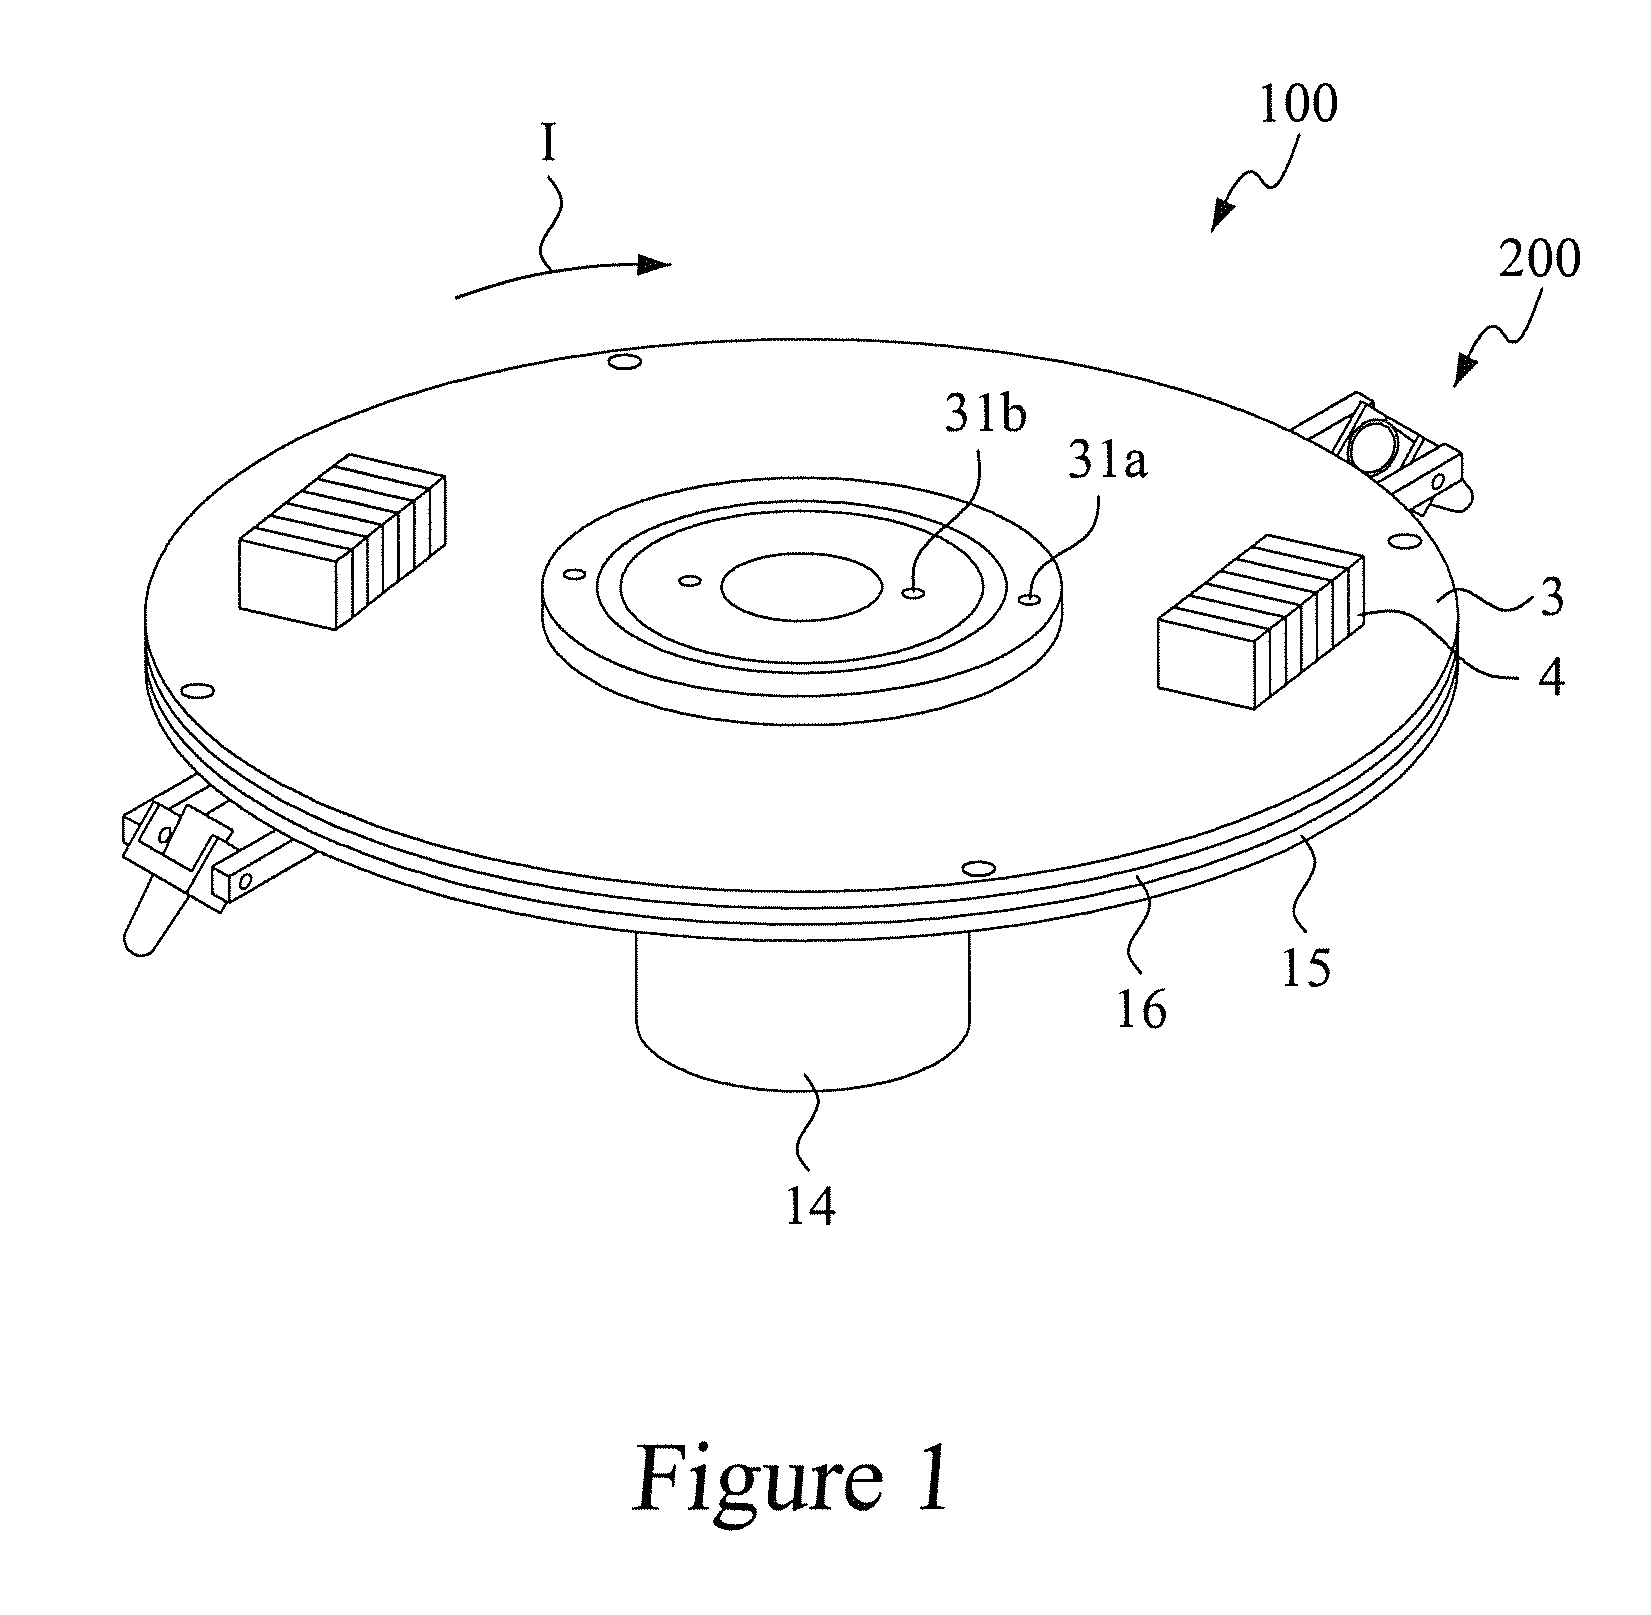 Disk-based fluid sample collection device